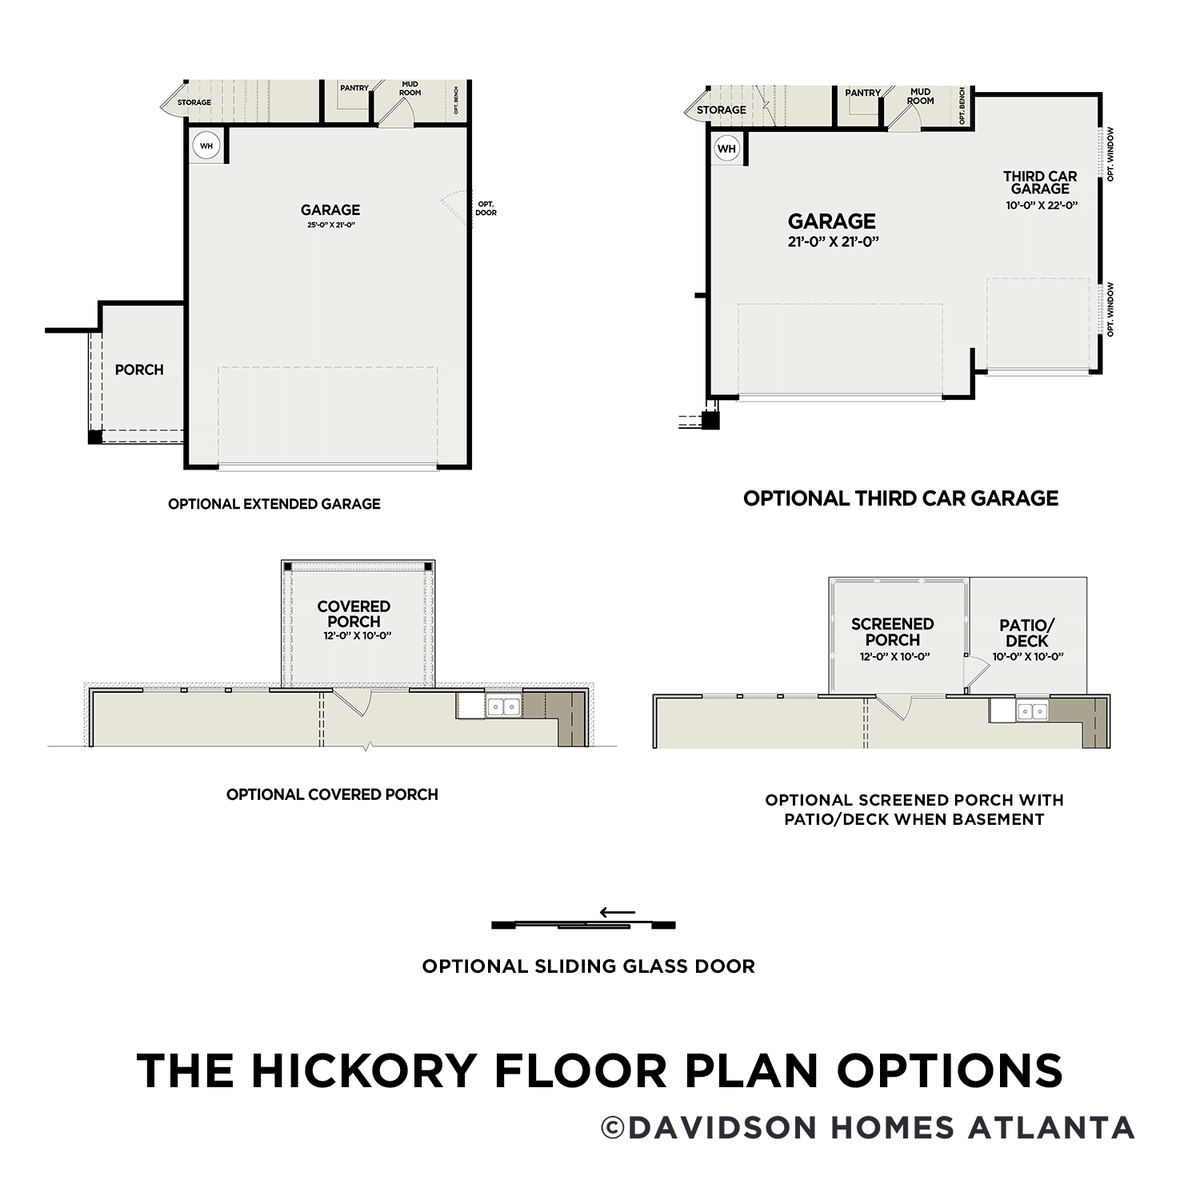 3 - The Hickory A buildable floor plan layout in Davidson Homes' Riverwood community.